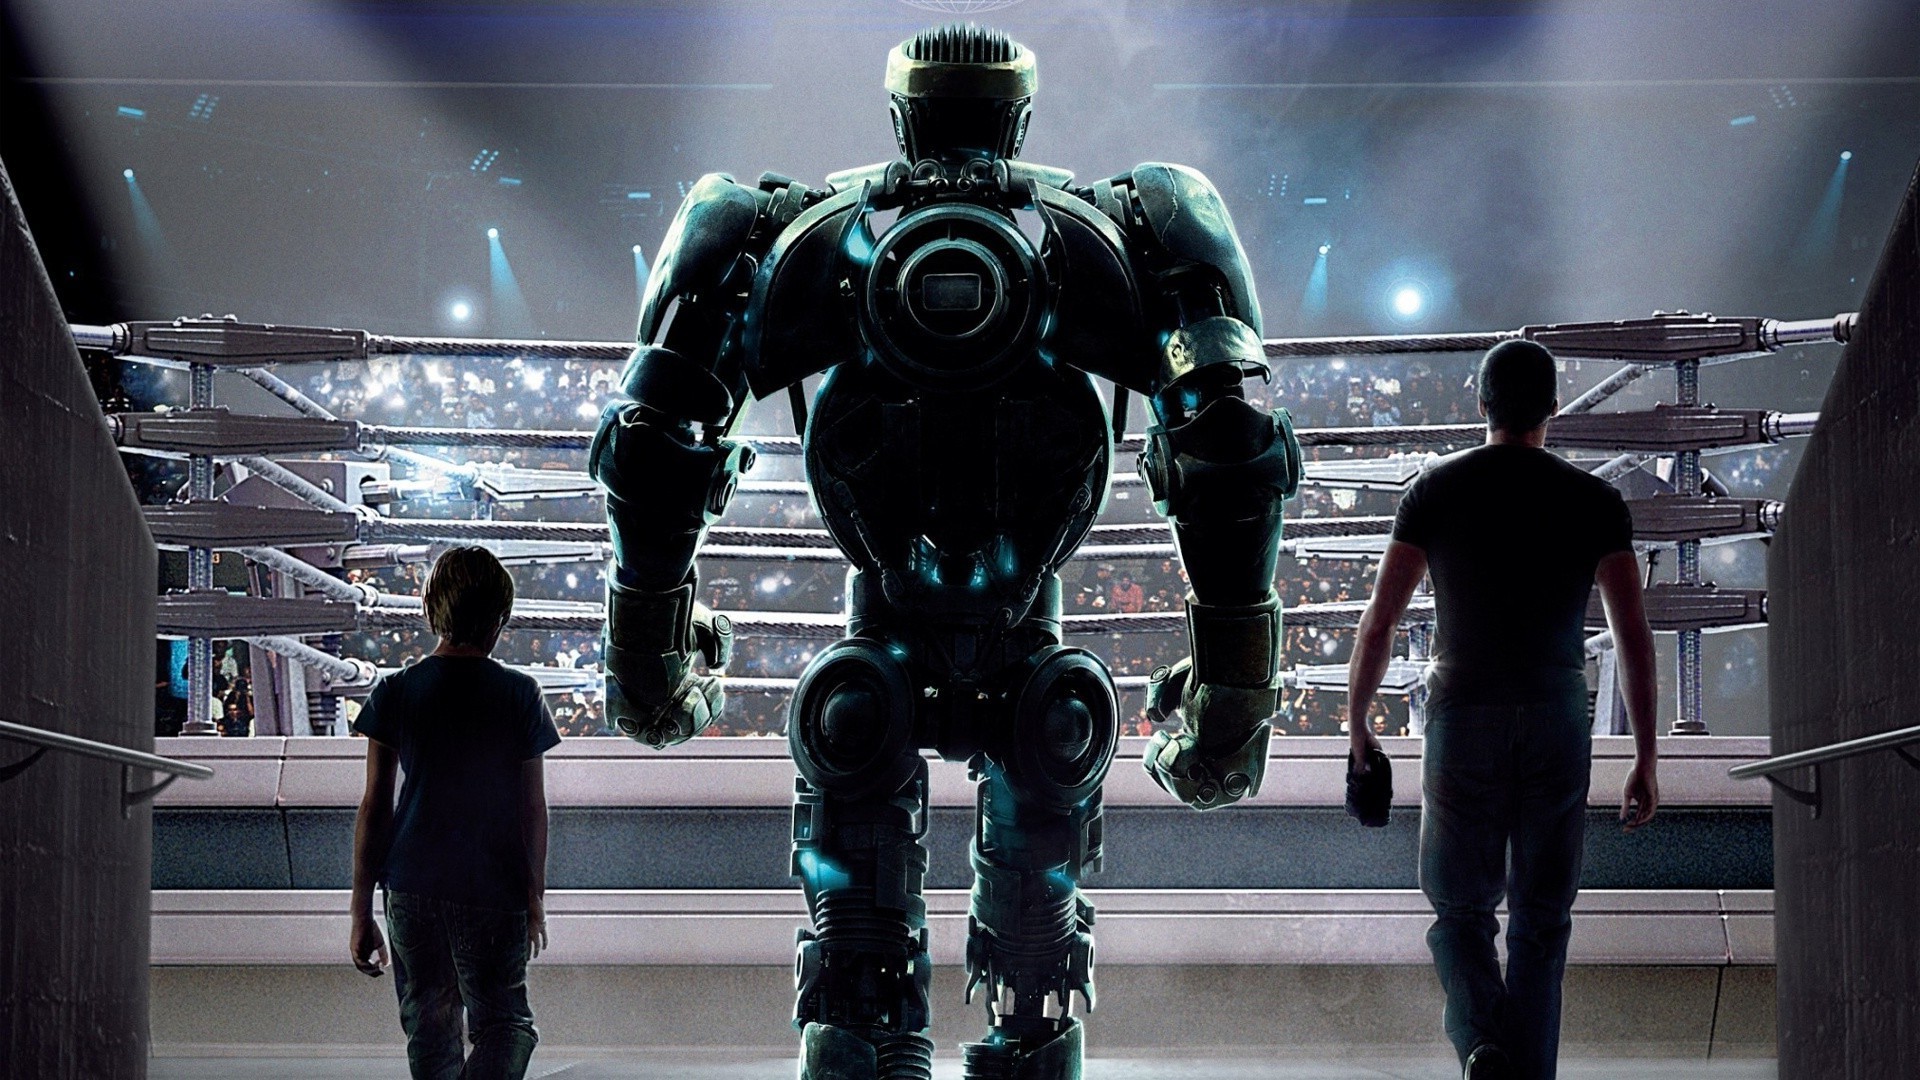 Real steel the game download